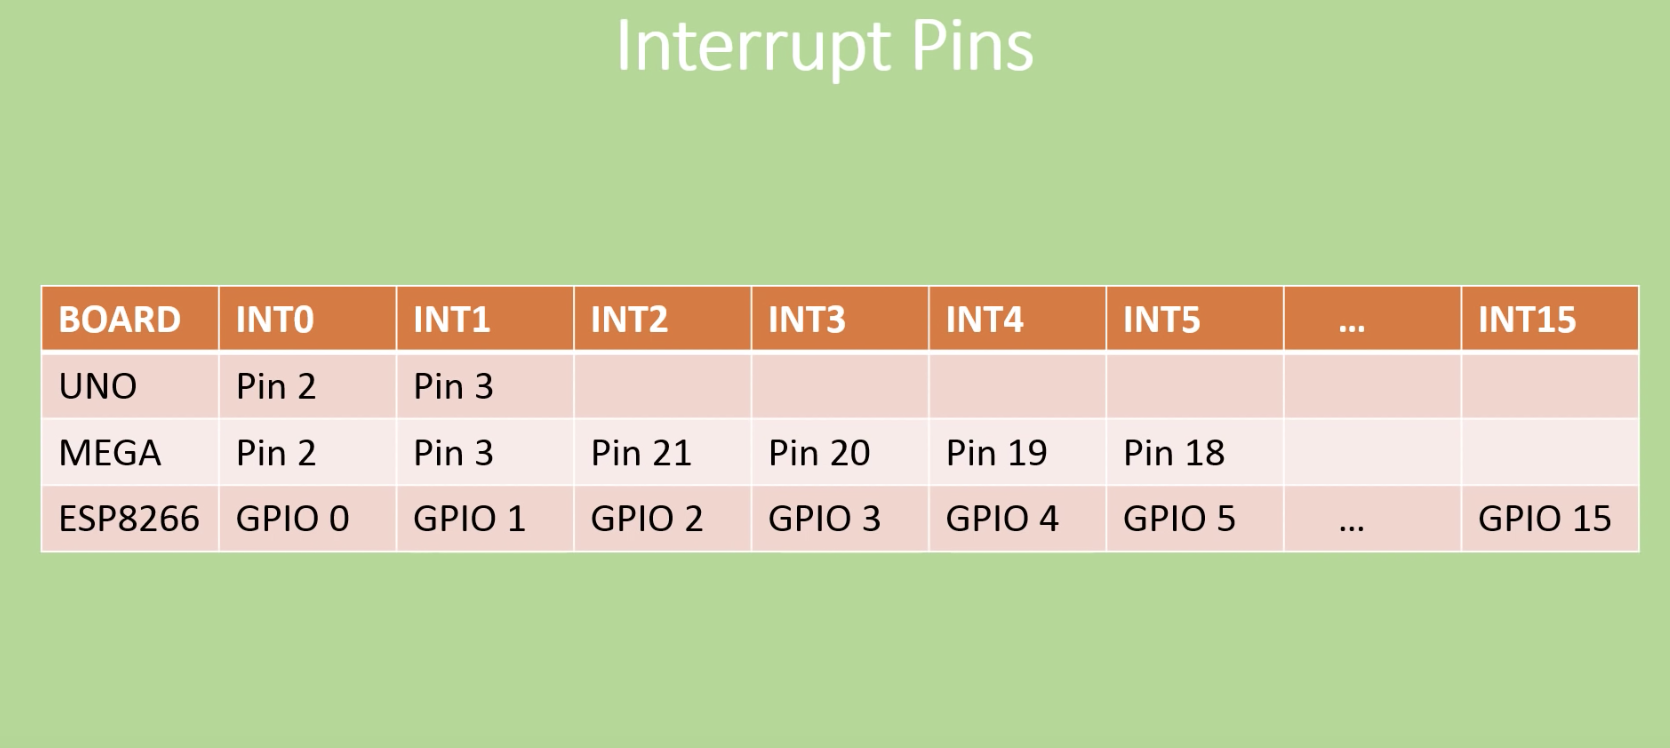 Using Interrupts with Arduino